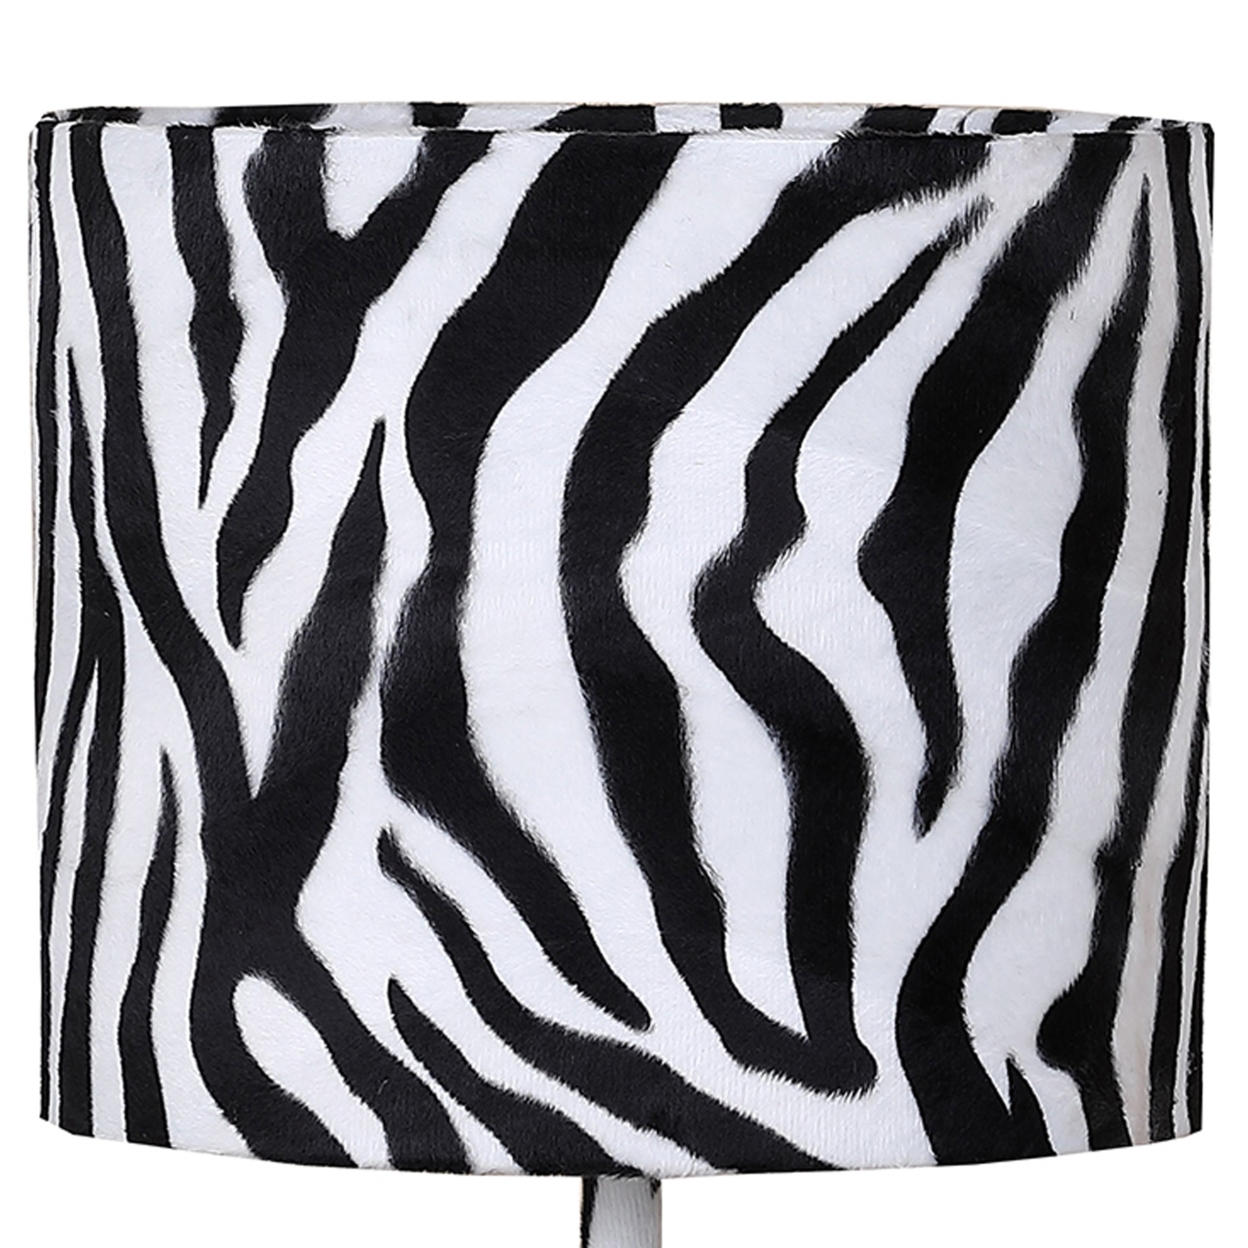 Fabric Wrapped Table Lamp With Animal Print, White And Black- Saltoro Sherpi